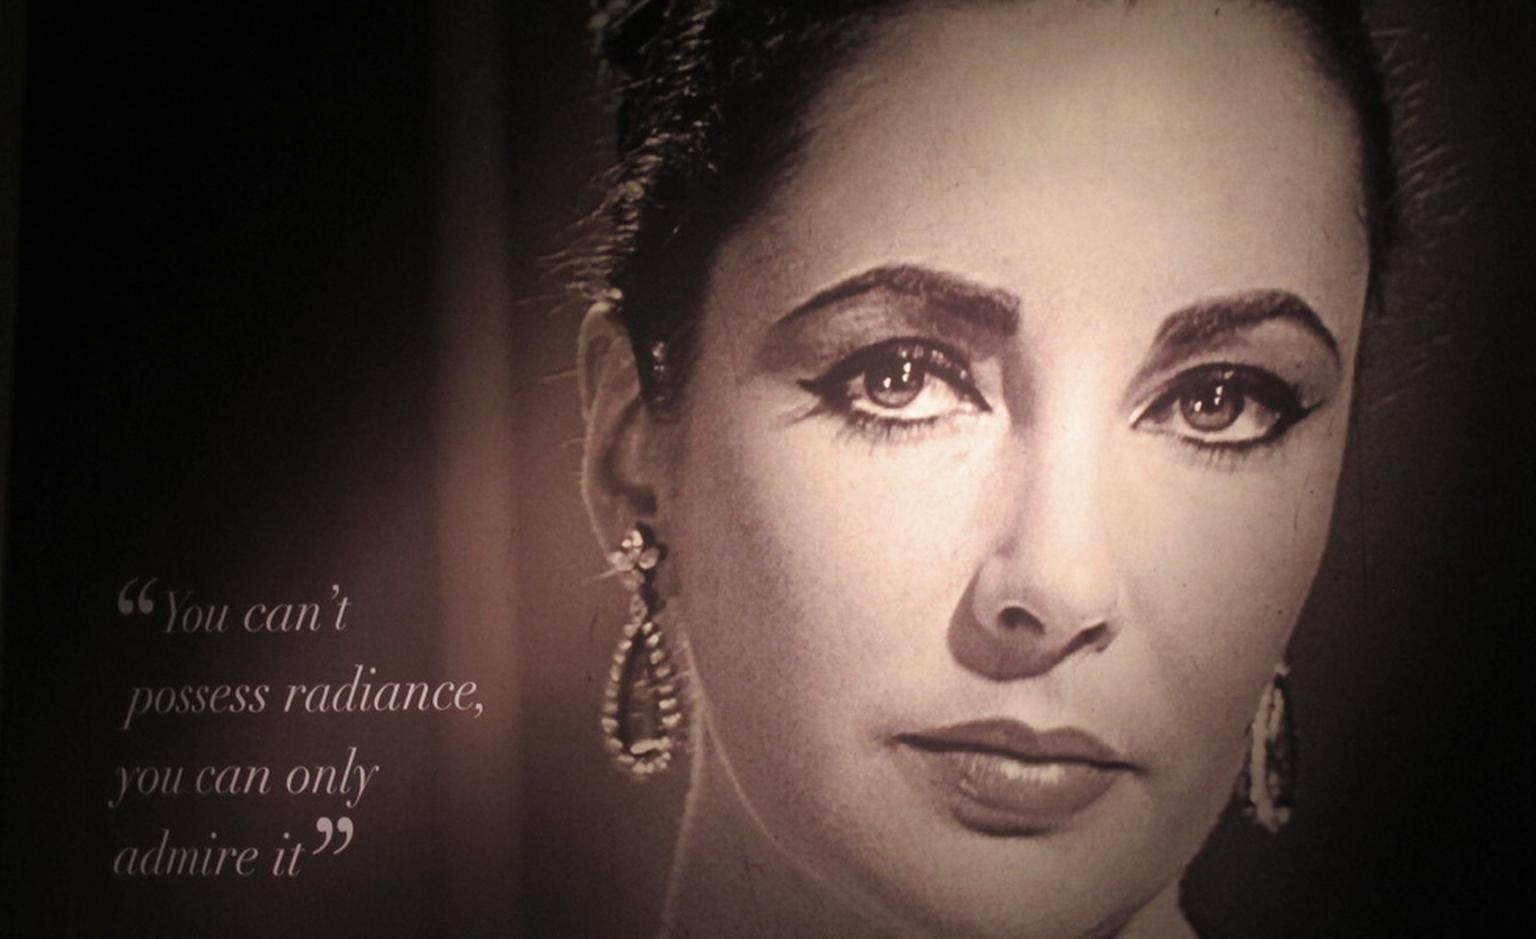 Poster of Elizabeth Taylor at the Christie's exhibition of her jewels, art and couture that is touring the world before the December sale in New York.